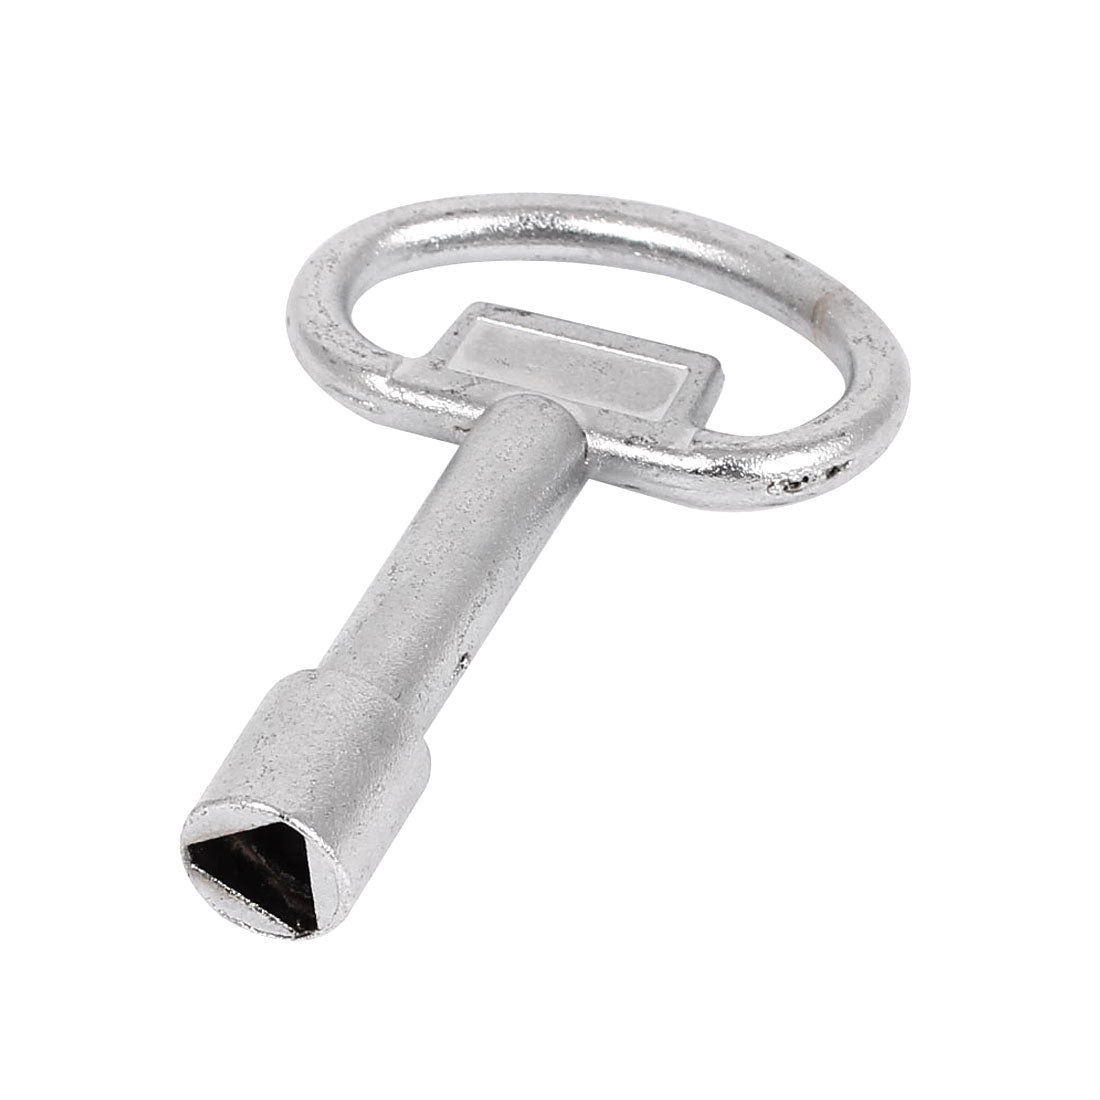 uxcell Uxcell Triangle Socket Utility Key for Electric Meter Box Cupboard Panel Lock